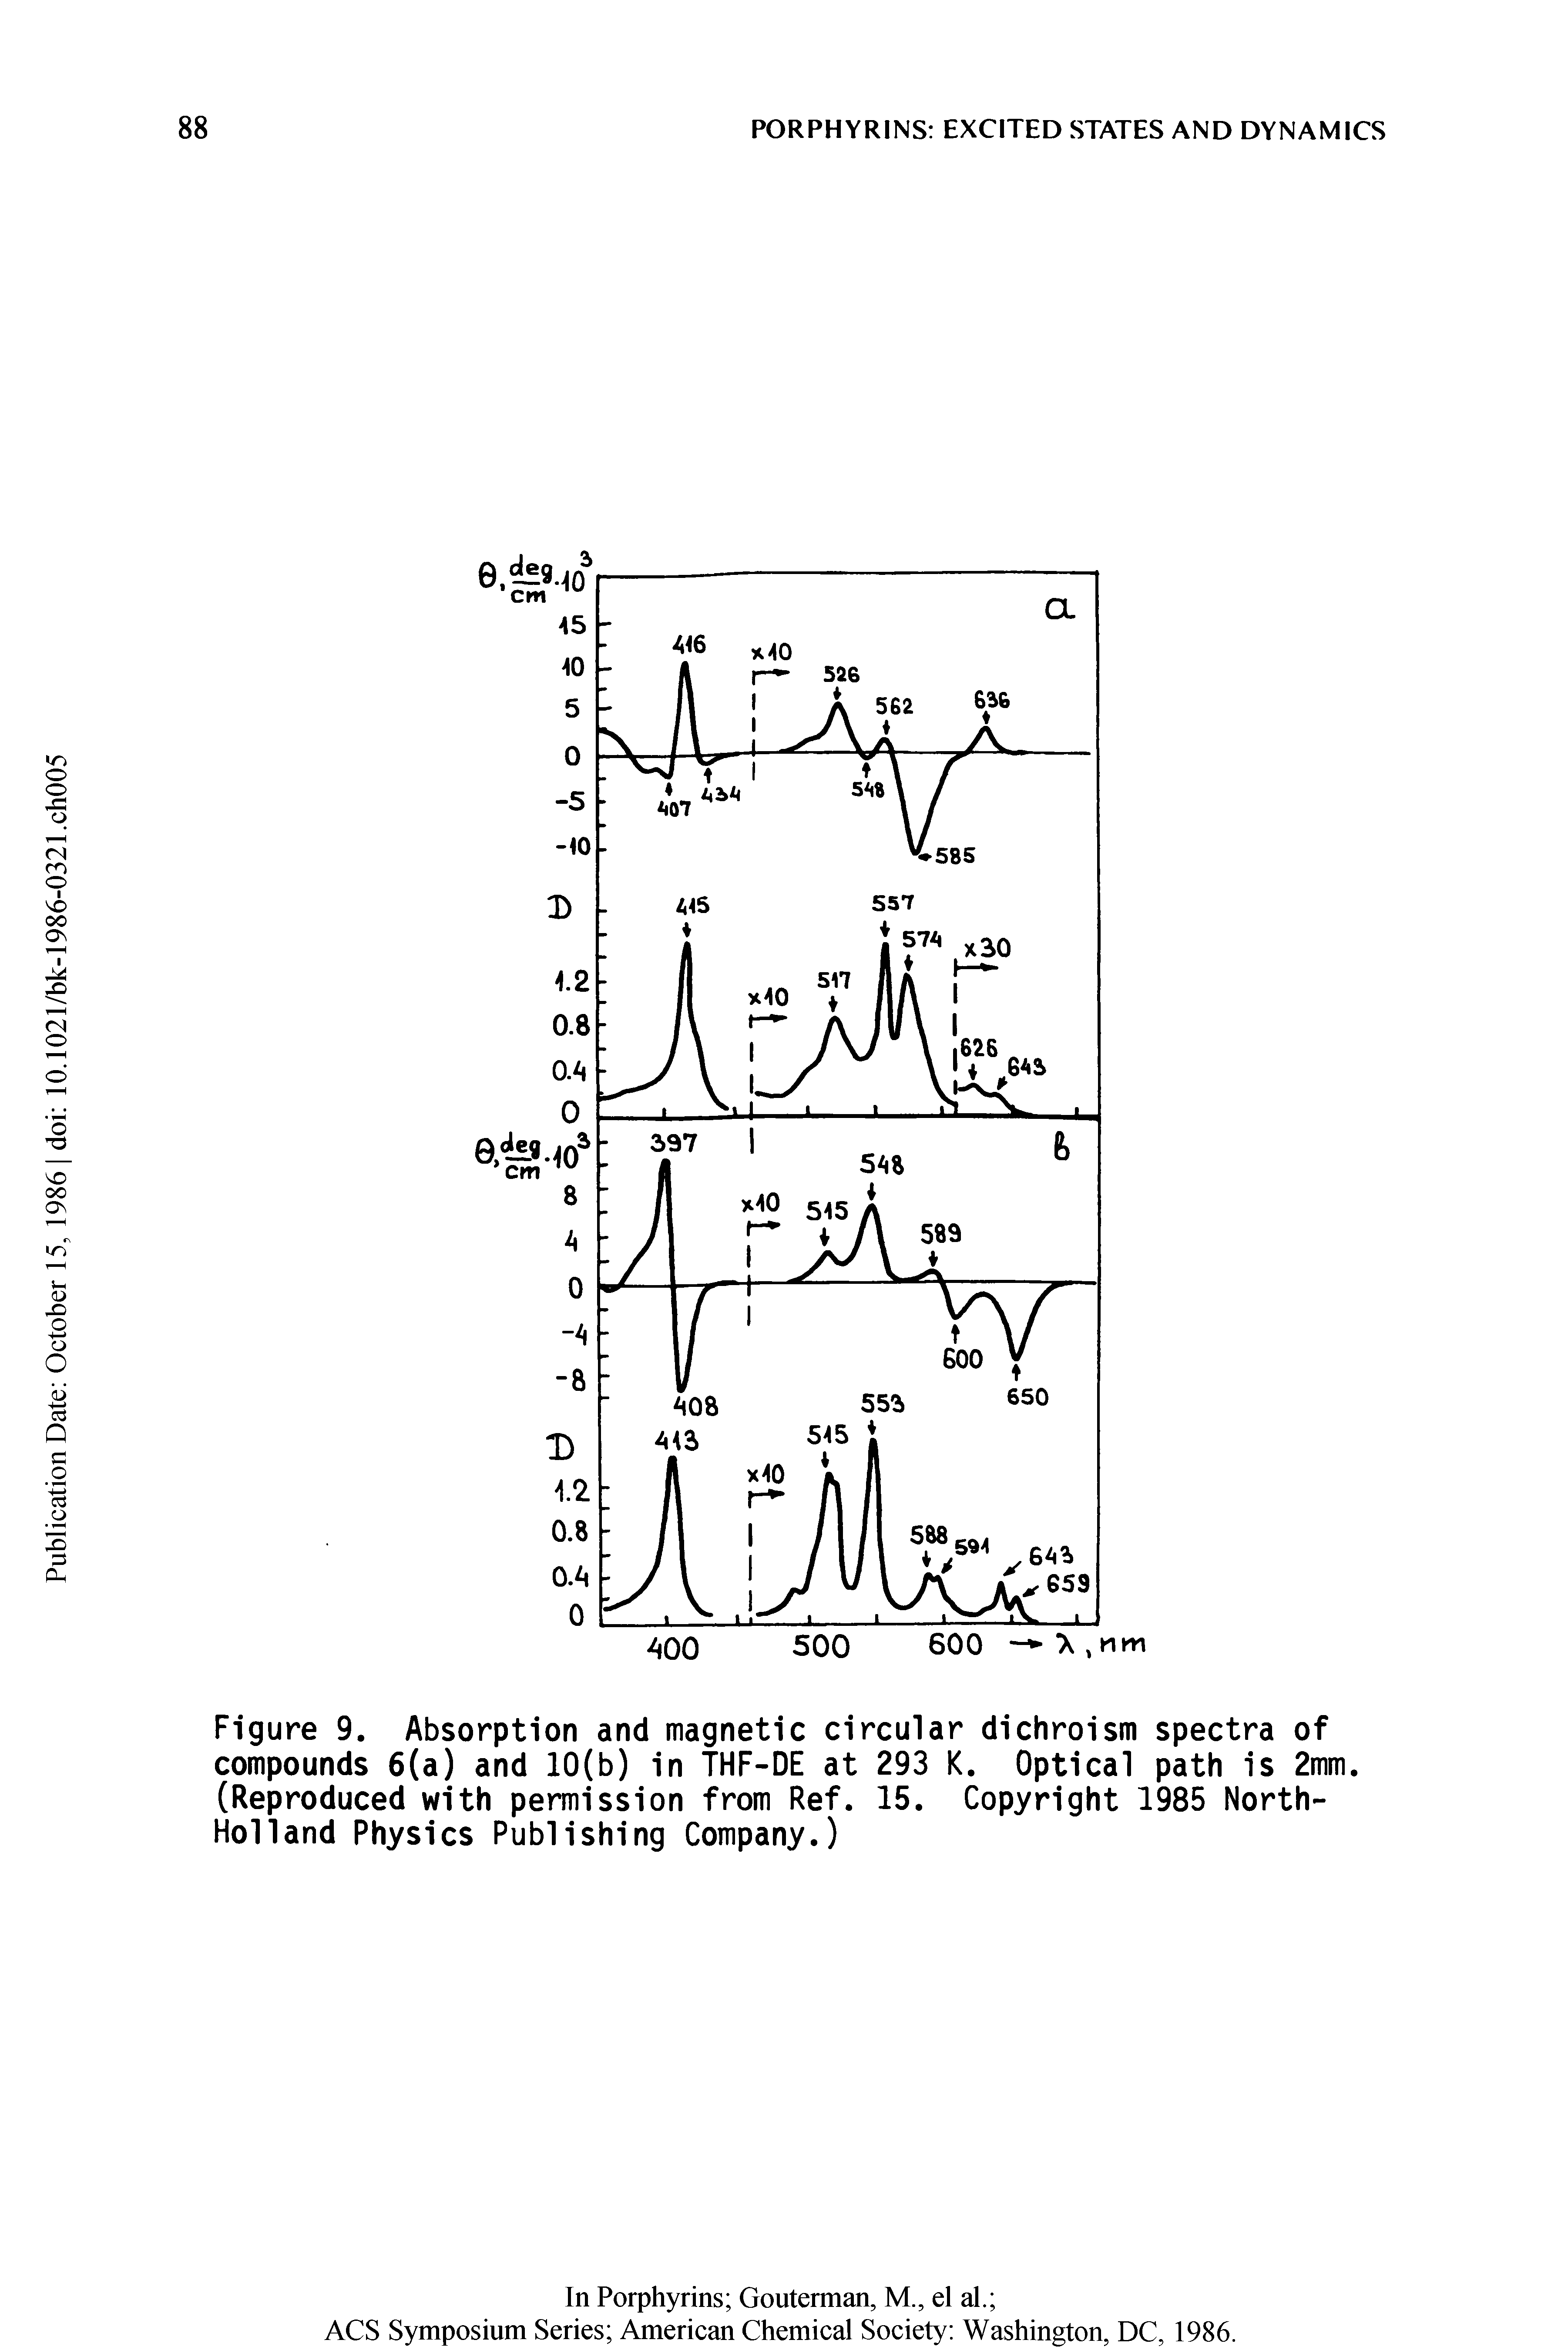 Figure 9. Absorption and magnetic circular dichroism spectra of compounds 6(a) and 10(b) in THF-DE at 293 K. Optical path is 2mm. (Reproduced with permission from Ref. 15. Copyright 1985 North-Holland Physics Publishing Company.)...